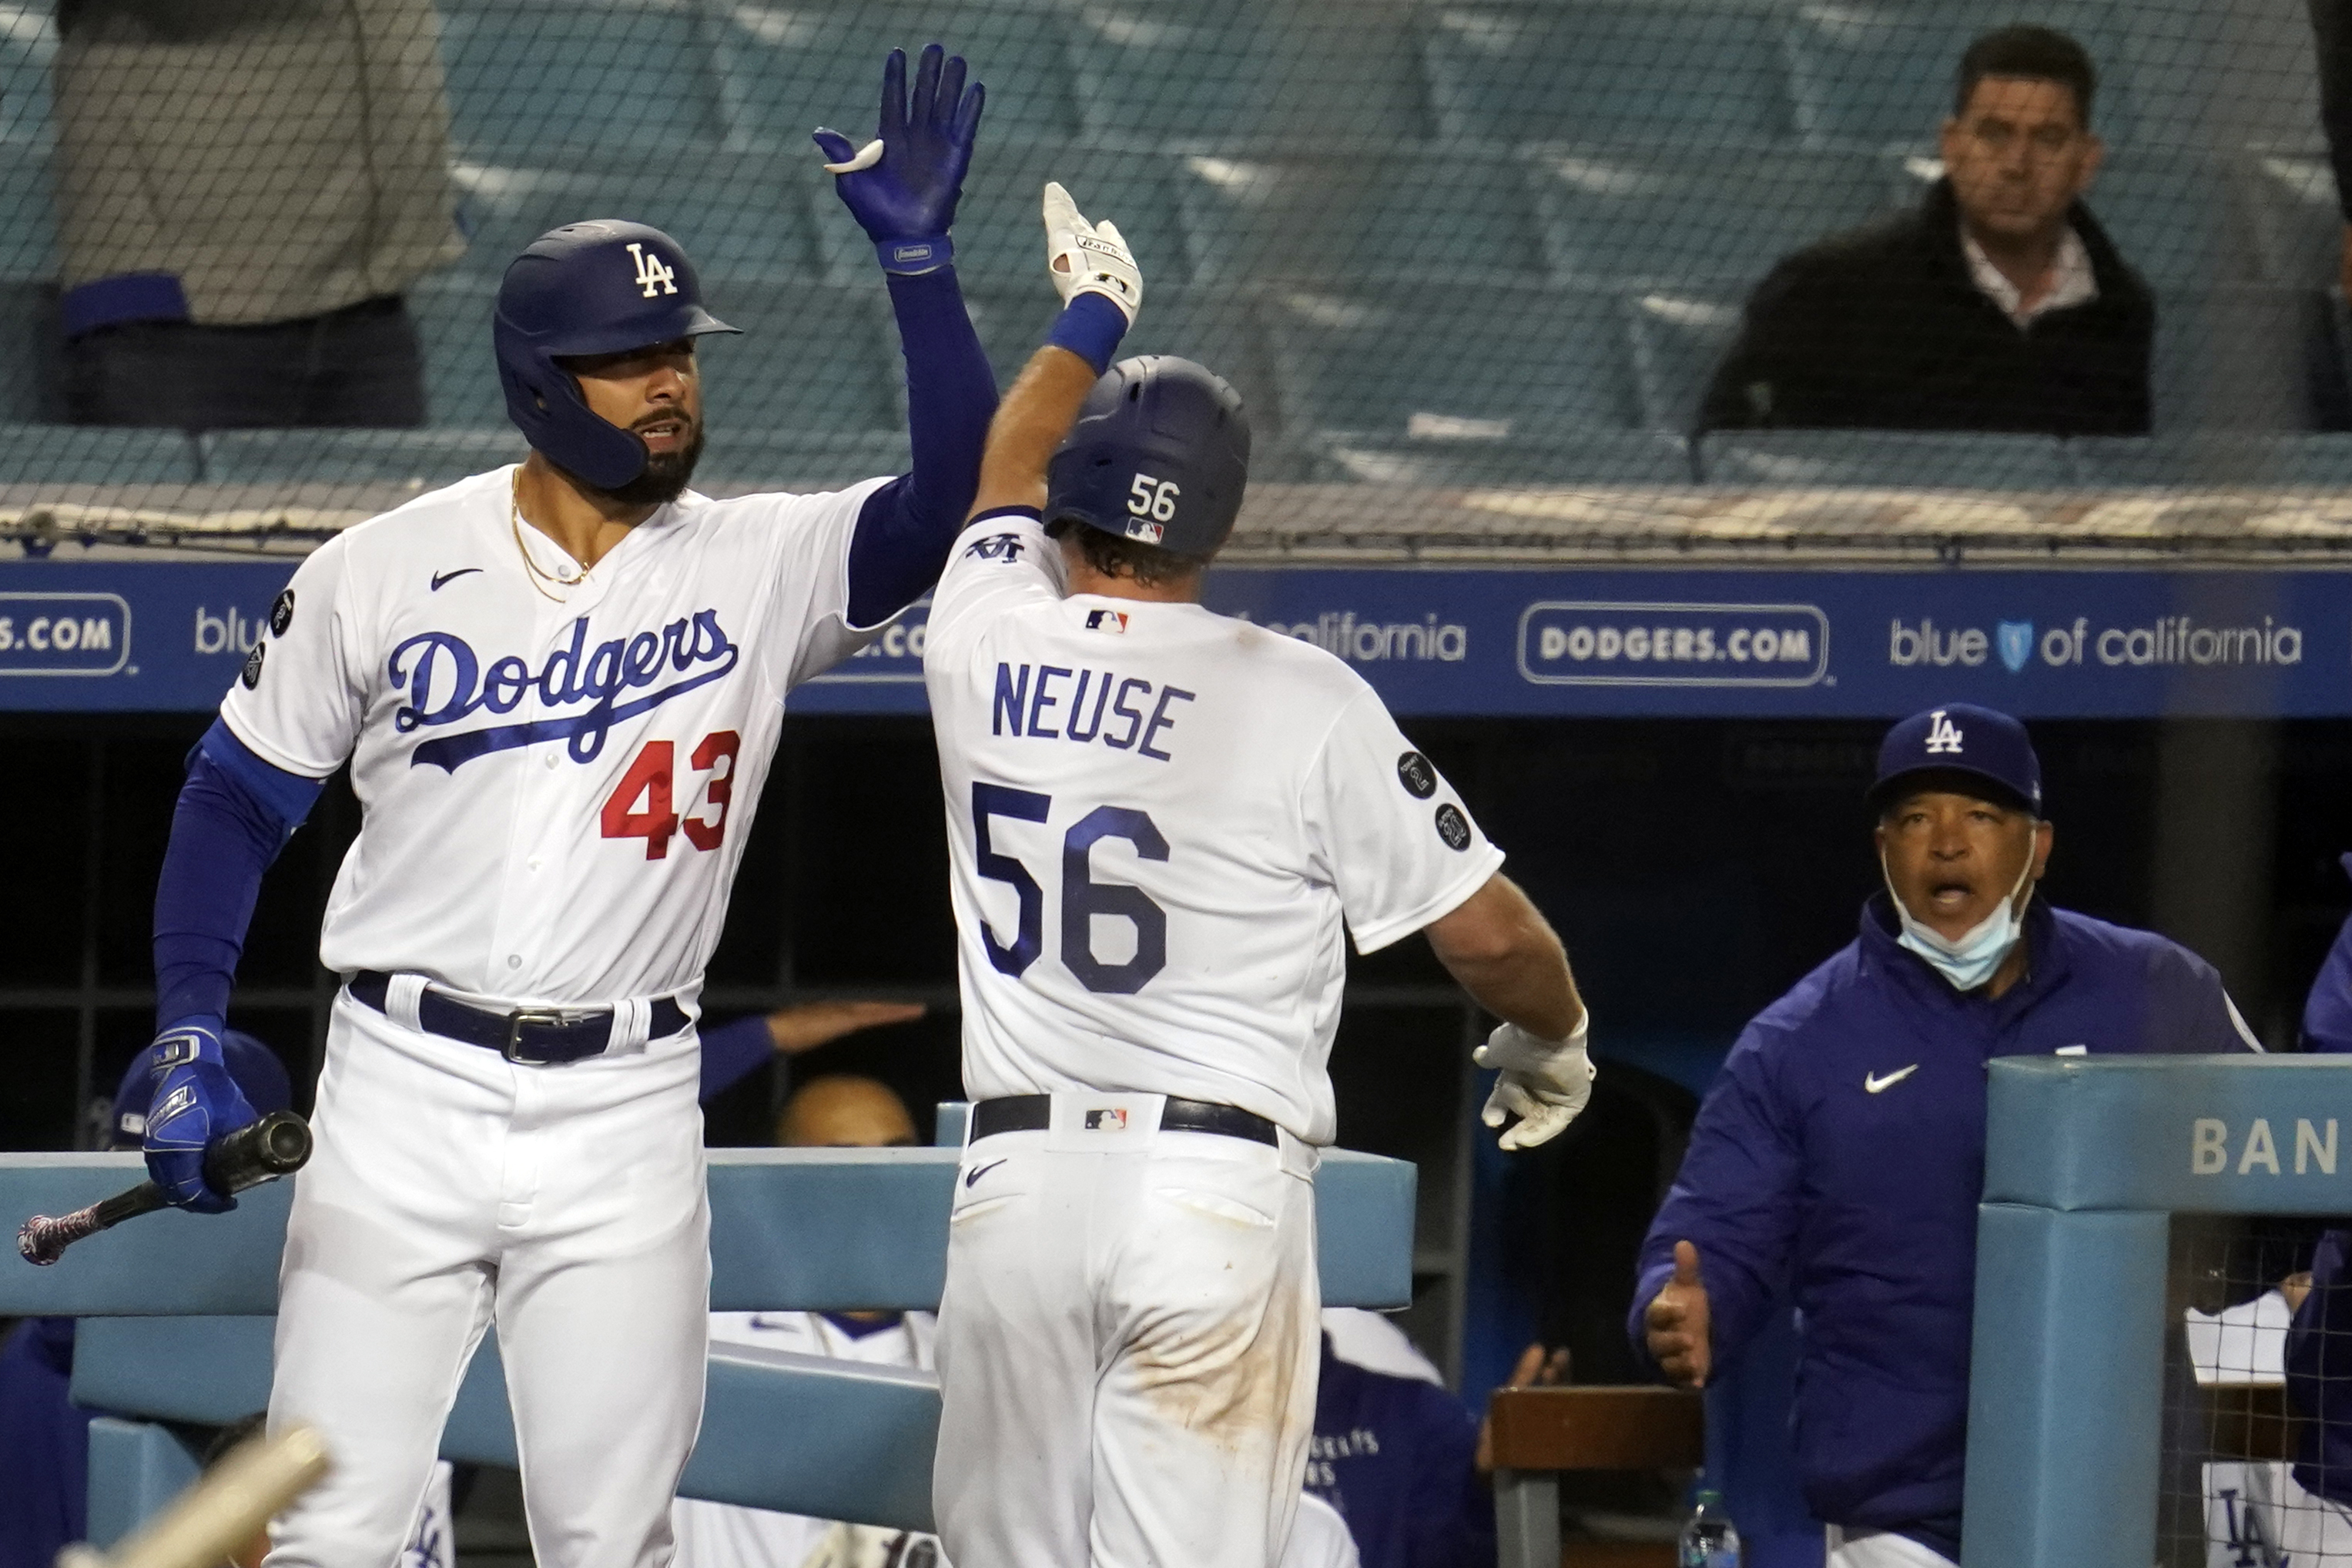 Padres hold off Dodgers 3-2 in resumption of SoCal rivalry